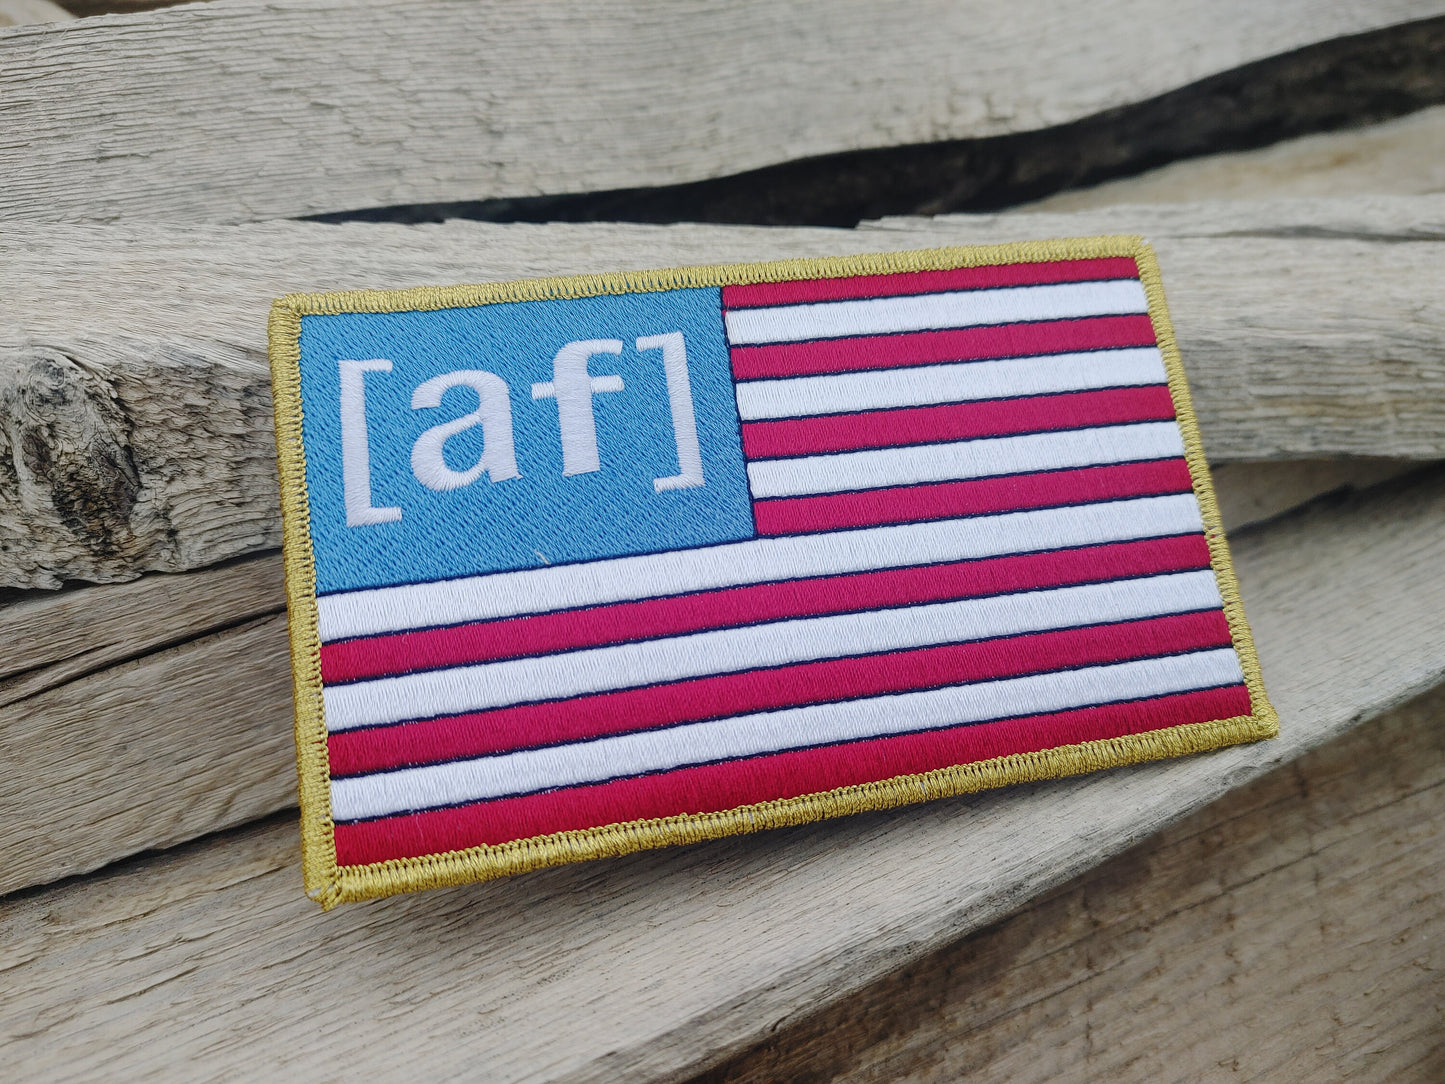 American AF - American USA US Flag - Unique Embroidered Tactical Morale Patch - Adult Swim Inspired Gift Hook backing